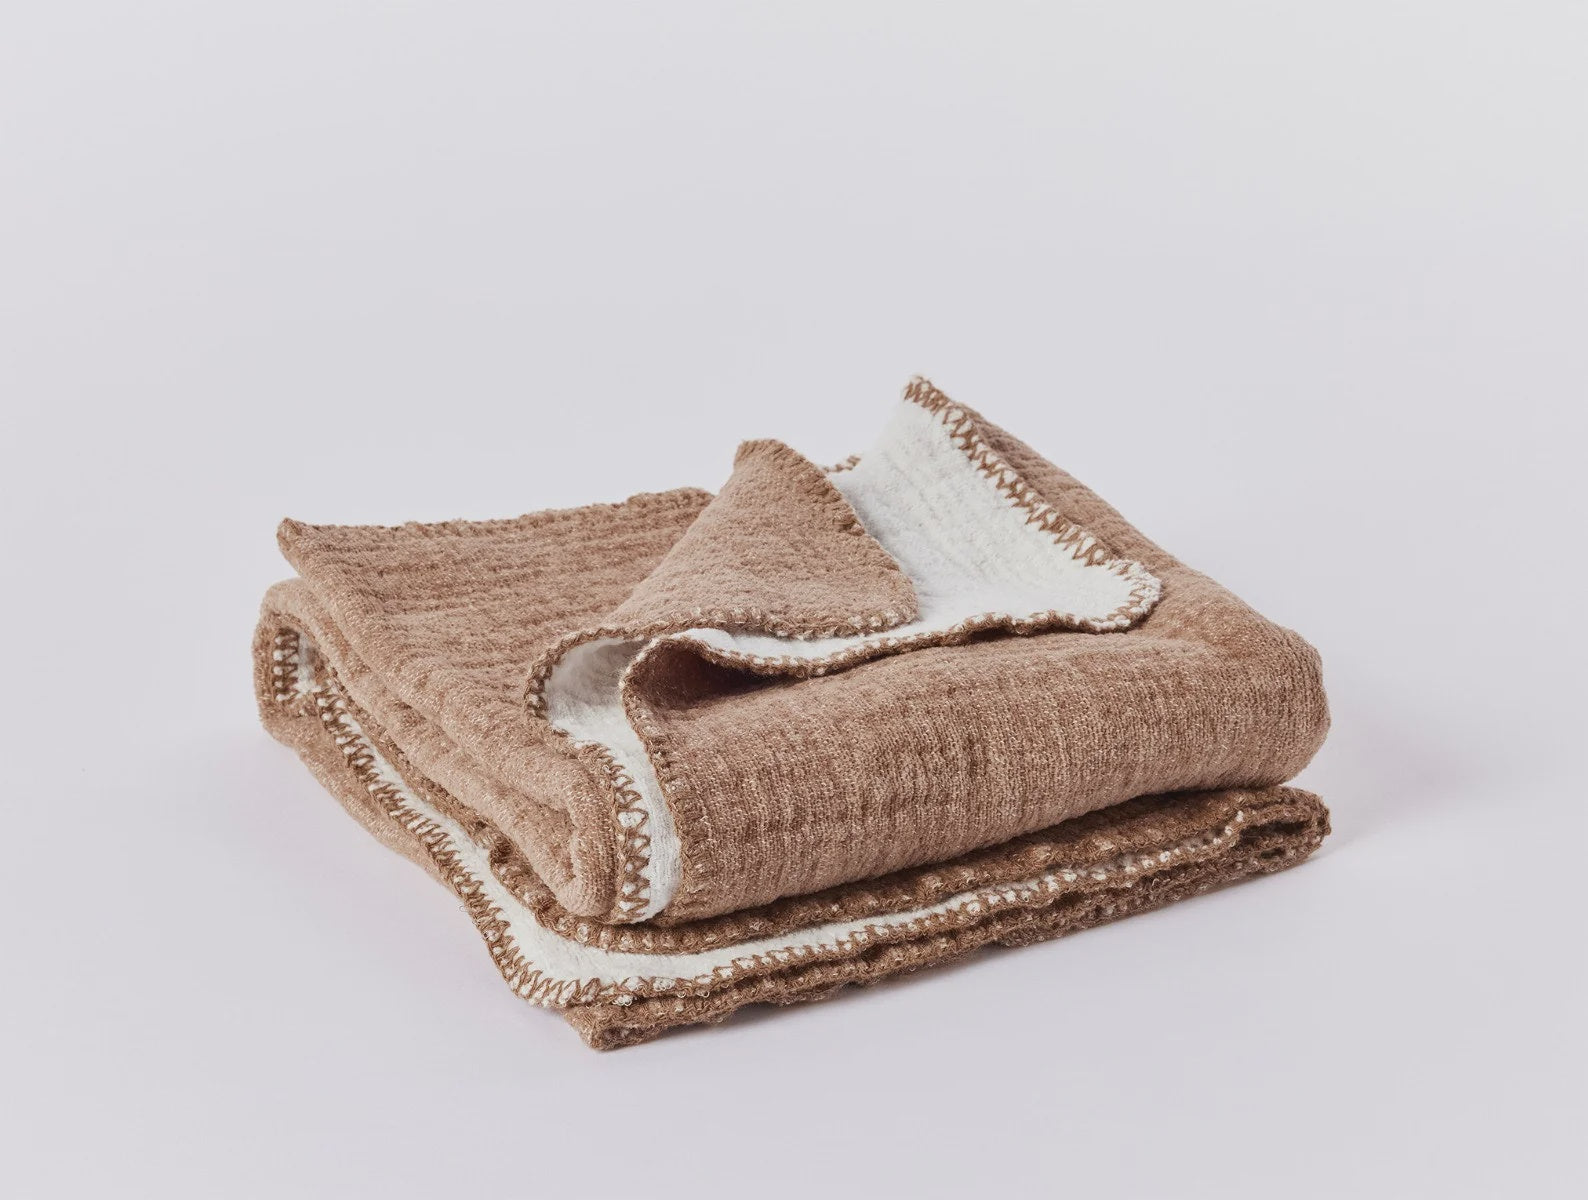 A neatly folded Cozy Cotton Blanket Clay Baby with a white interior and fringed edges, displayed against a plain light background in a Scottsdale Arizona bungalow by Coyuchi Inc.